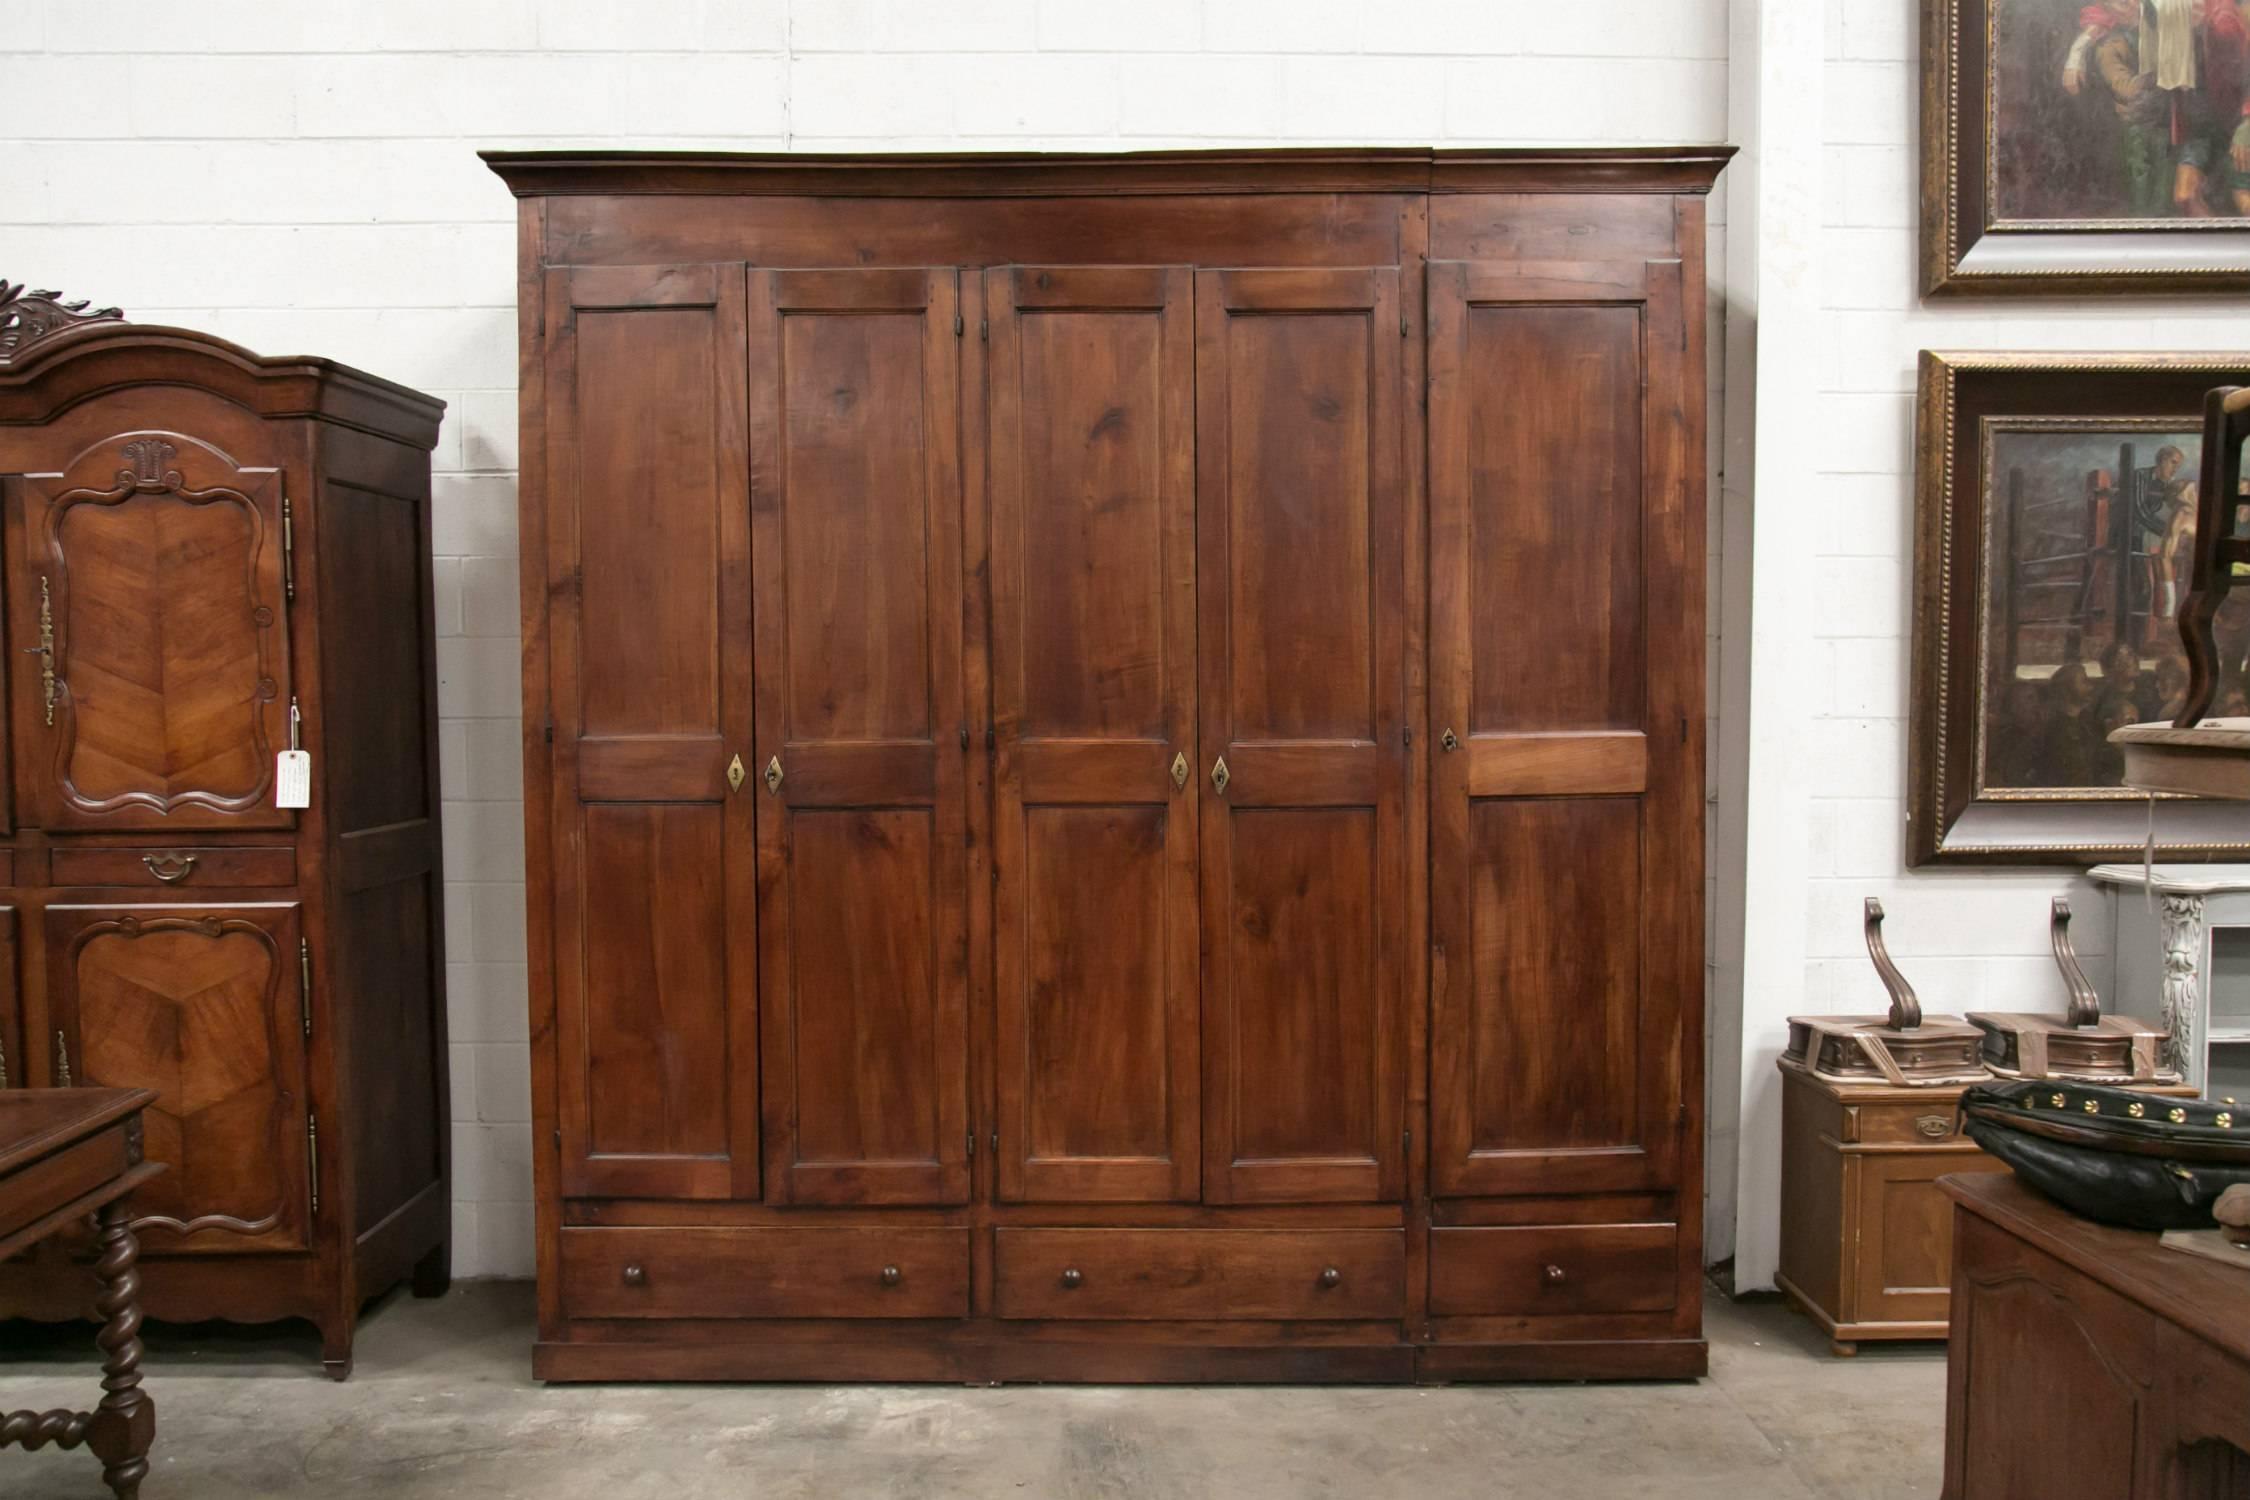 Monumental French Louis Philippe period placard or wardrobe handcrafted of cherrywood by skilled artisans of Mont Saint-Michel, an island commune in Normandy. custom-made for a nearby manor, having five paneled doors above three drawers, resting on